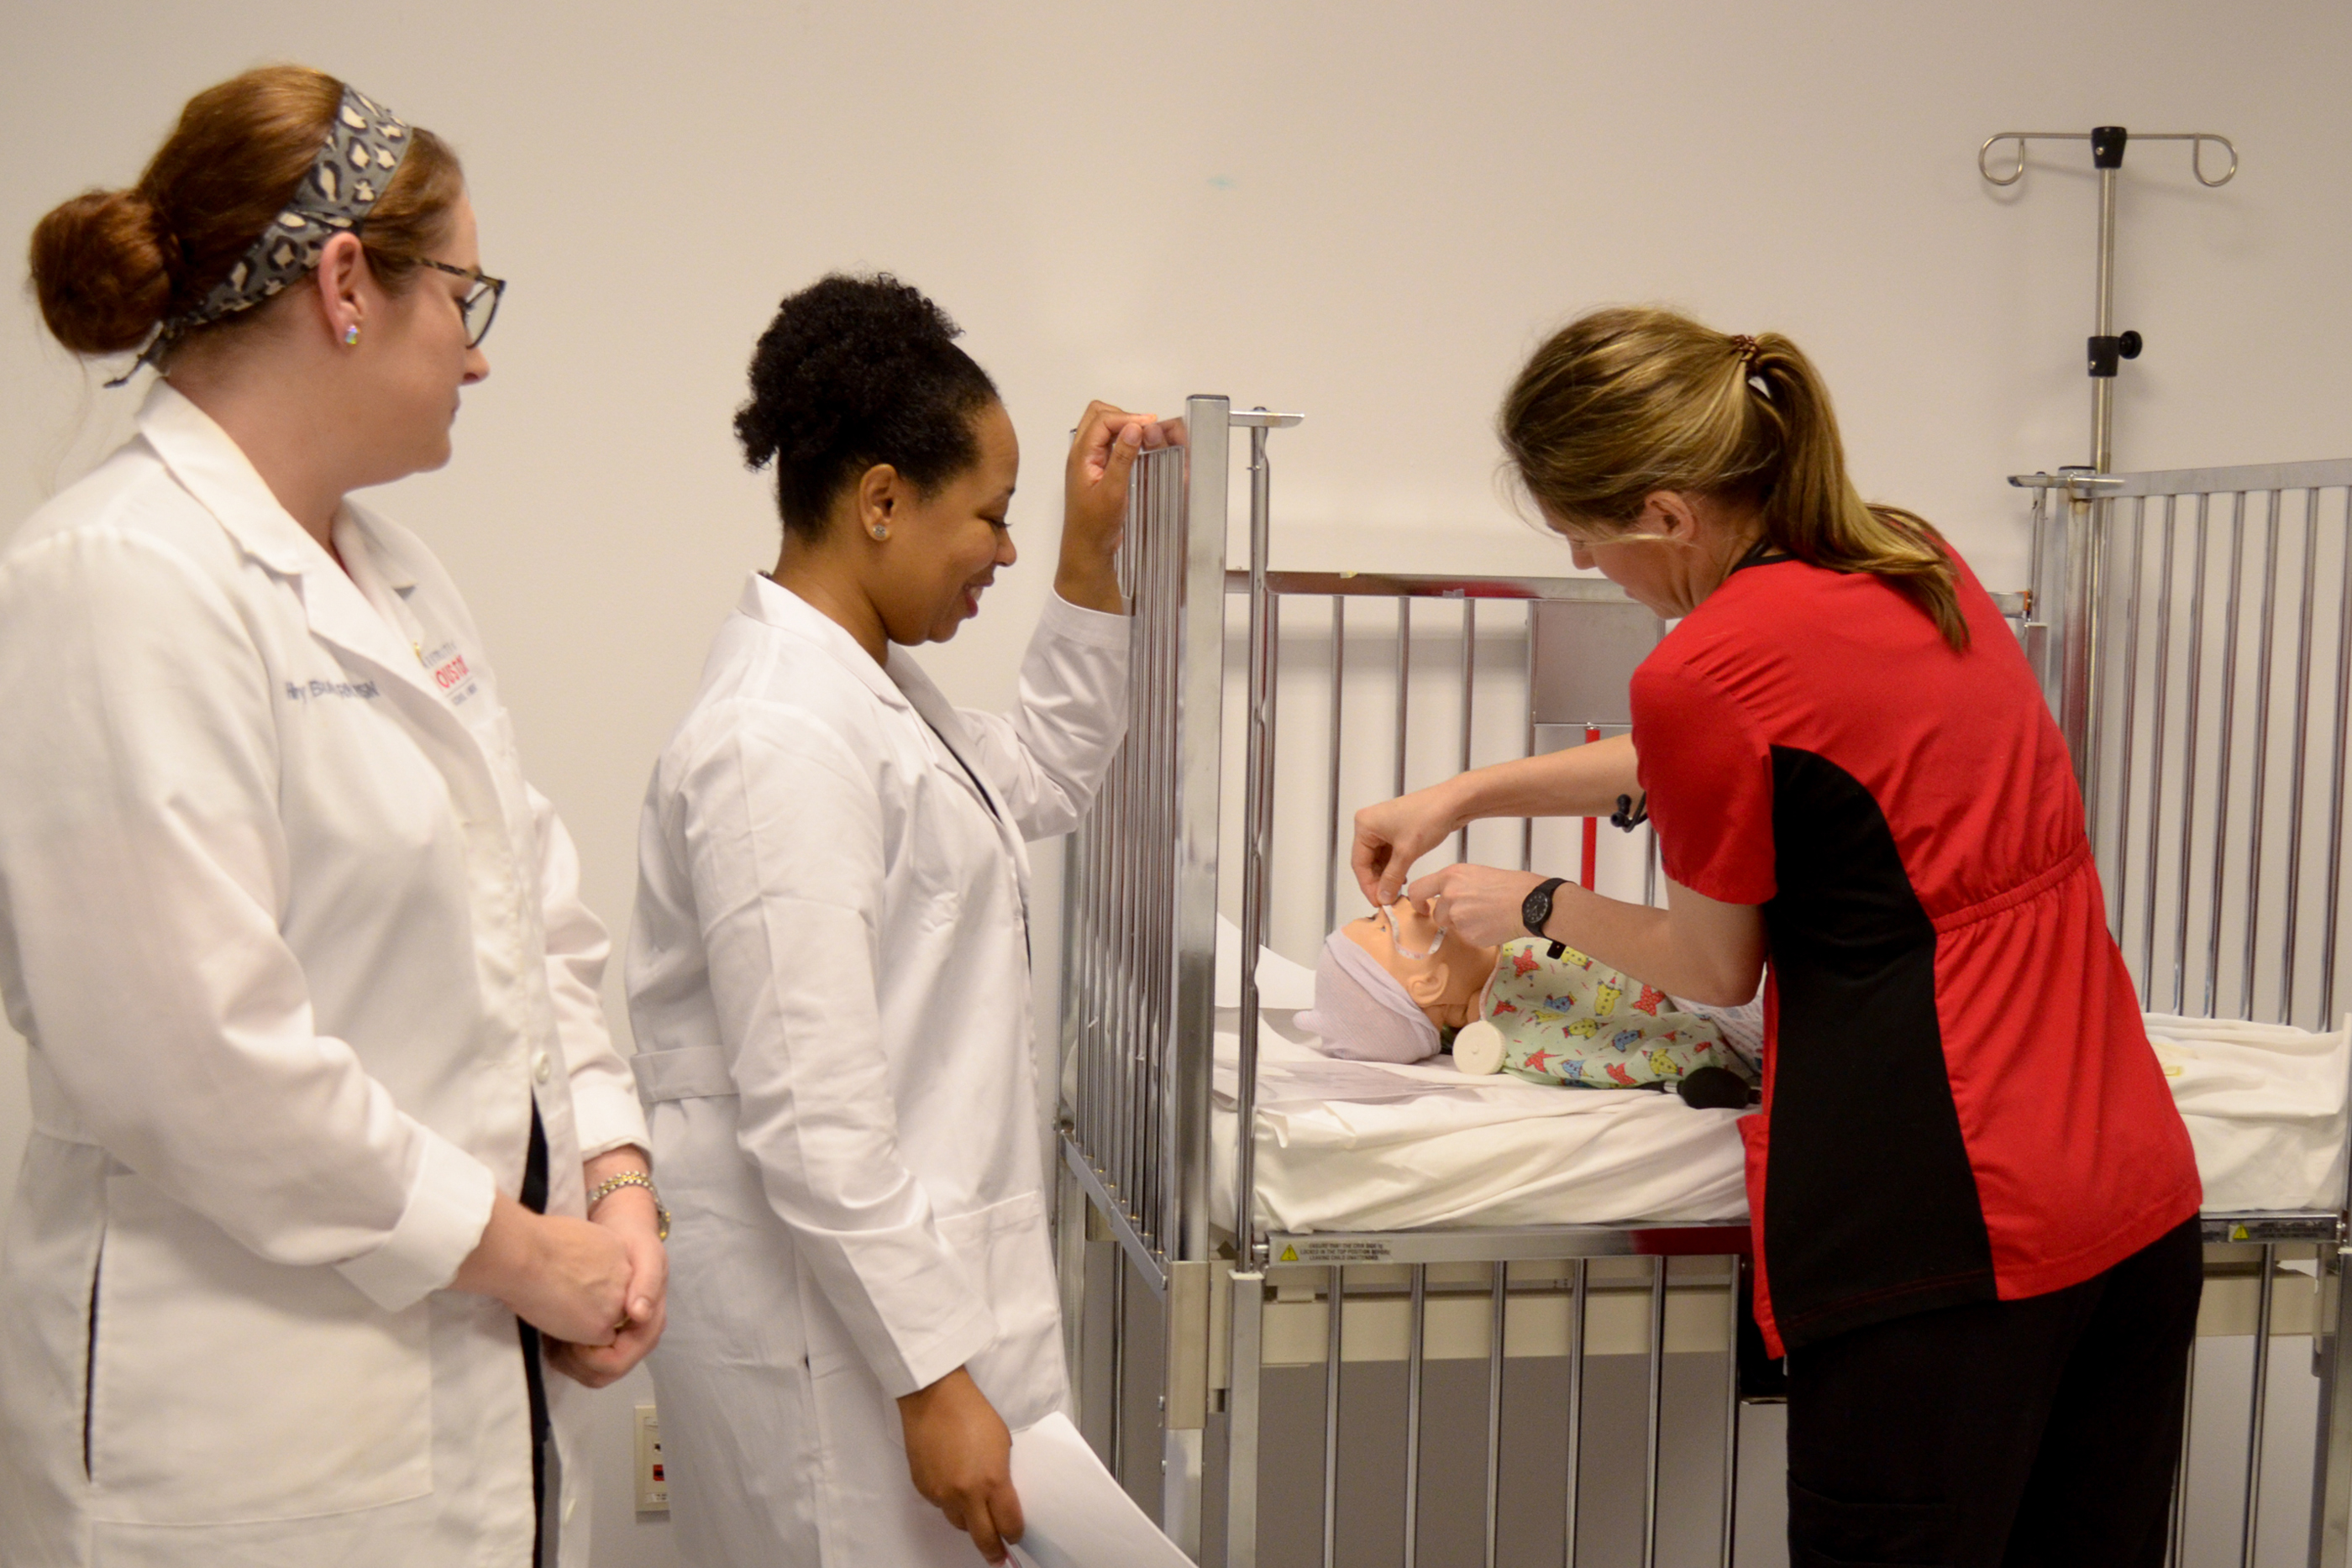 Faculty and nursing student with baby simulator